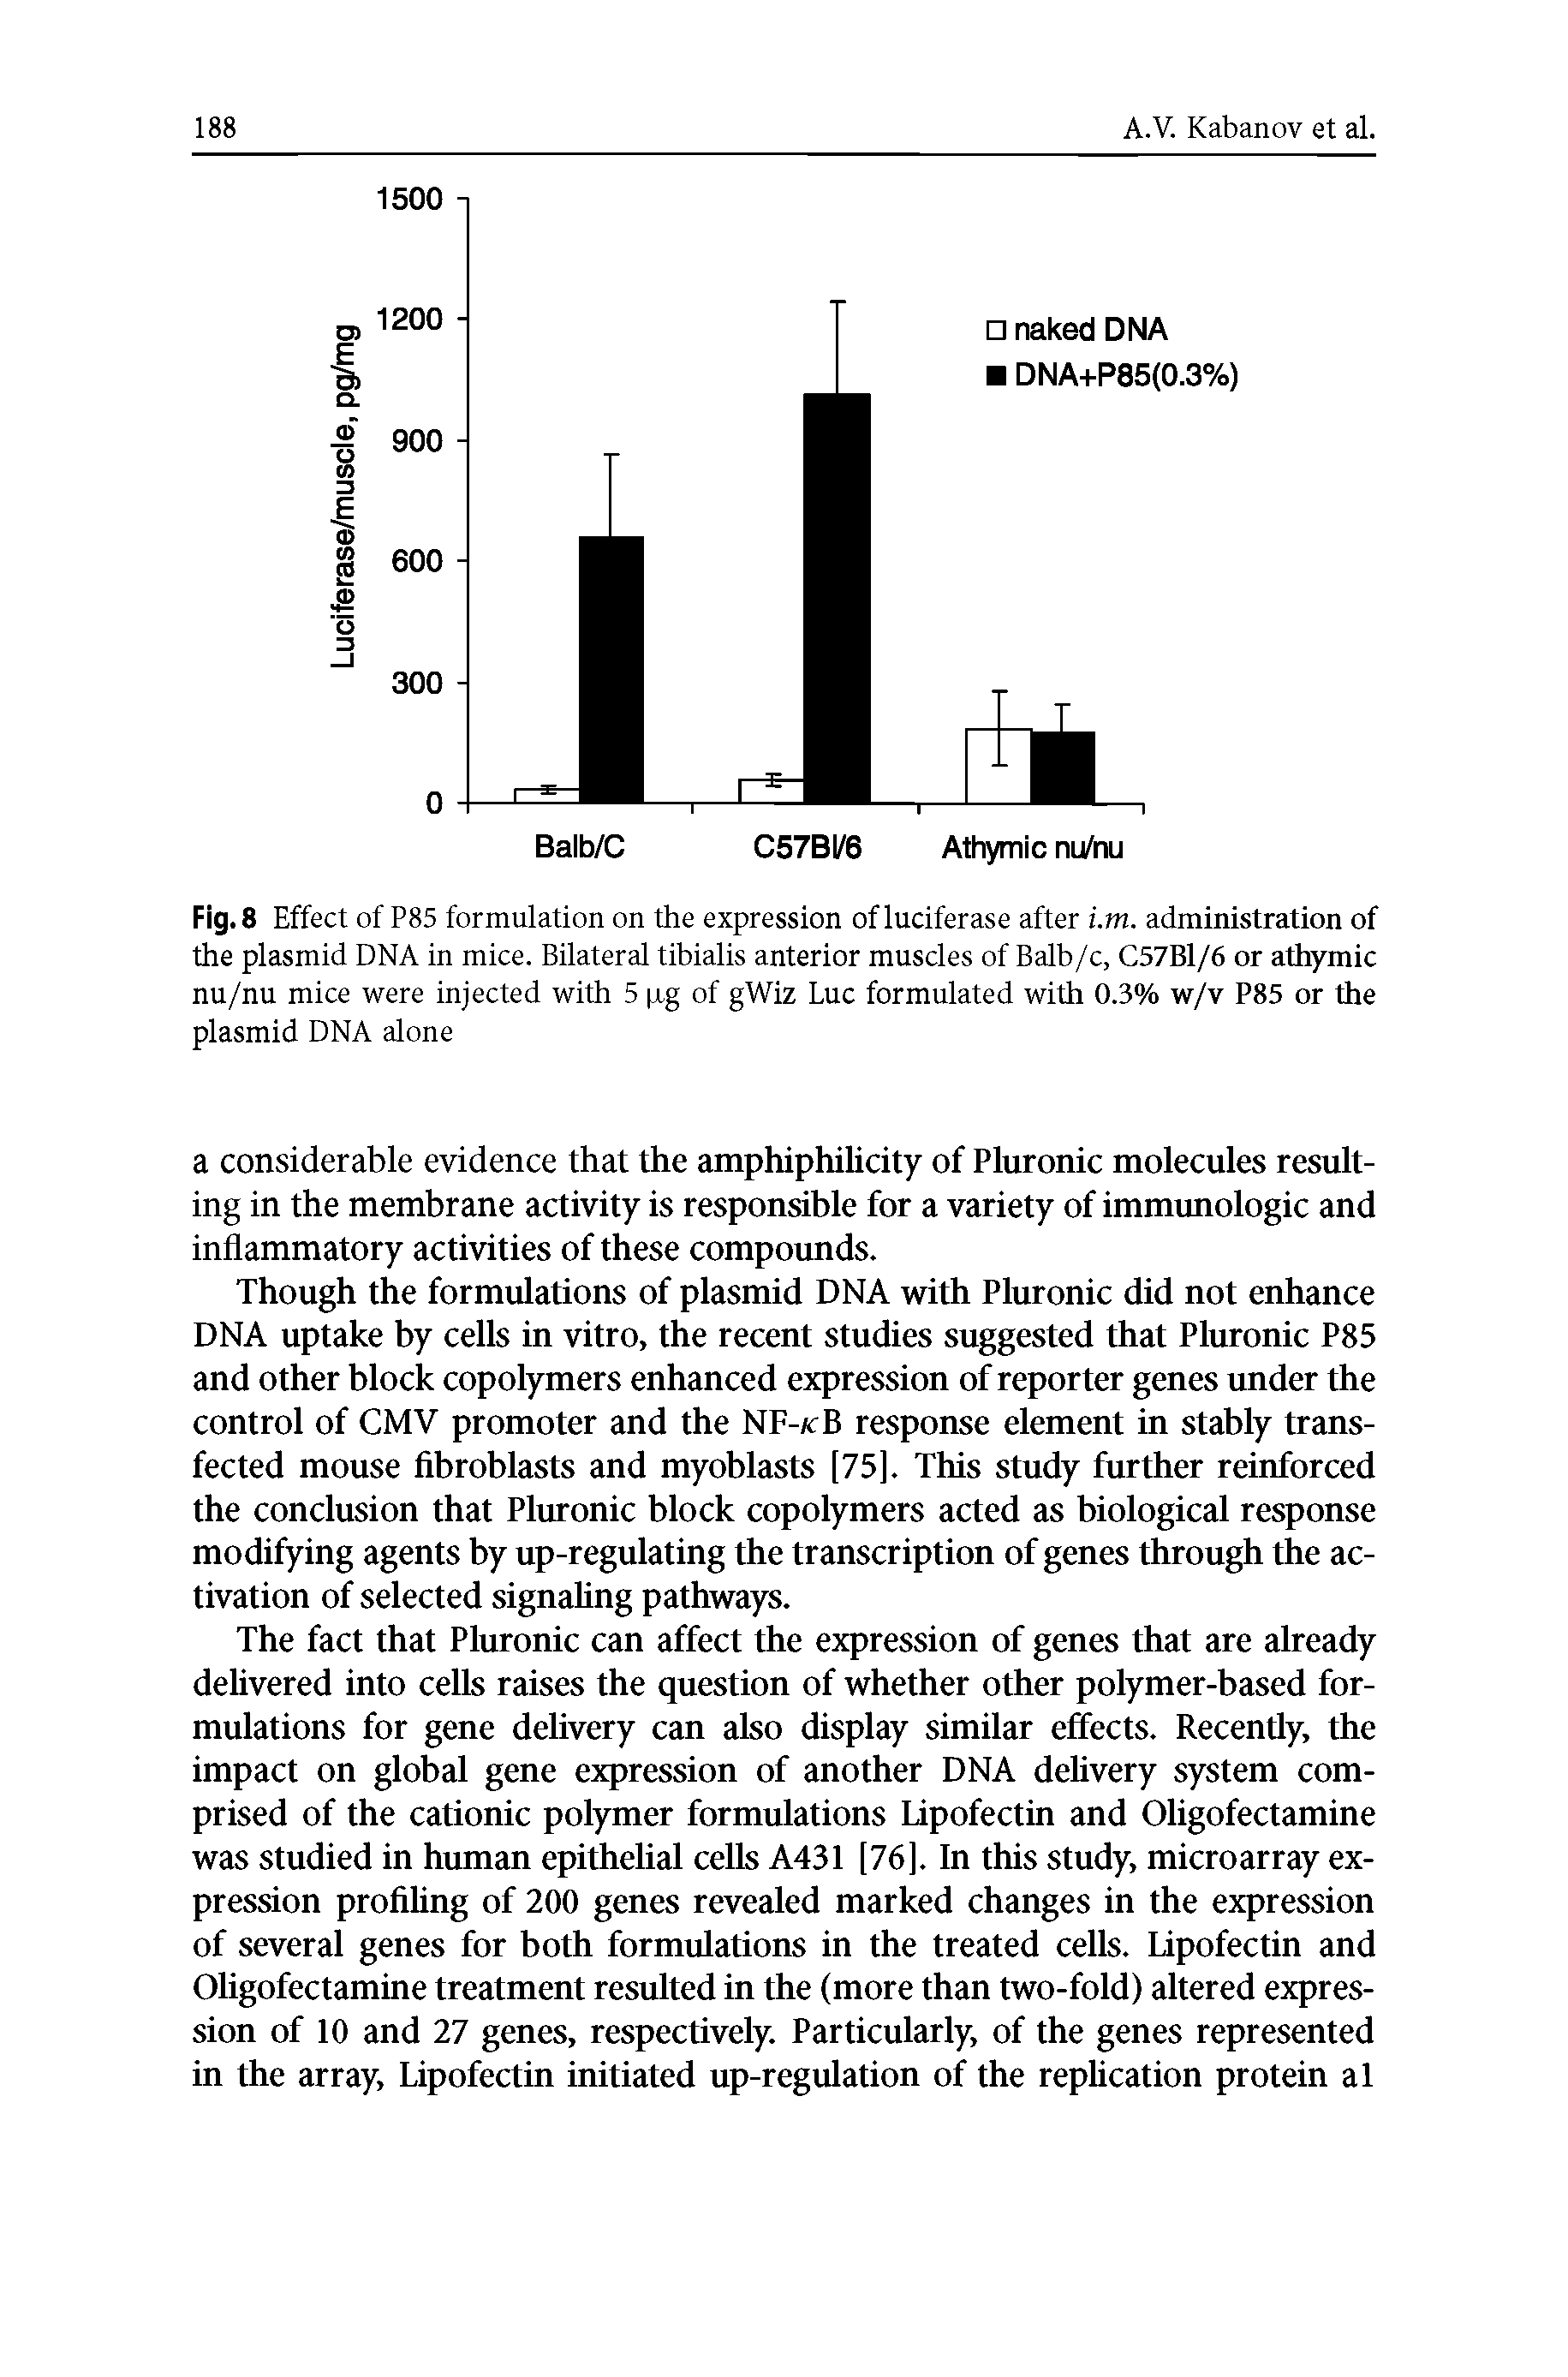 Fig. 8 Effect of P85 formulation on the expression of luciferase after i.m. administration of the plasmid DNA in mice. Bilateral tibialis anterior muscles of Balb/c, C57B1/6 or athymic nu/nu mice were injected with 5 xg of gWiz Luc formulated with 0.3% w/v P85 or the plasmid DNA alone...